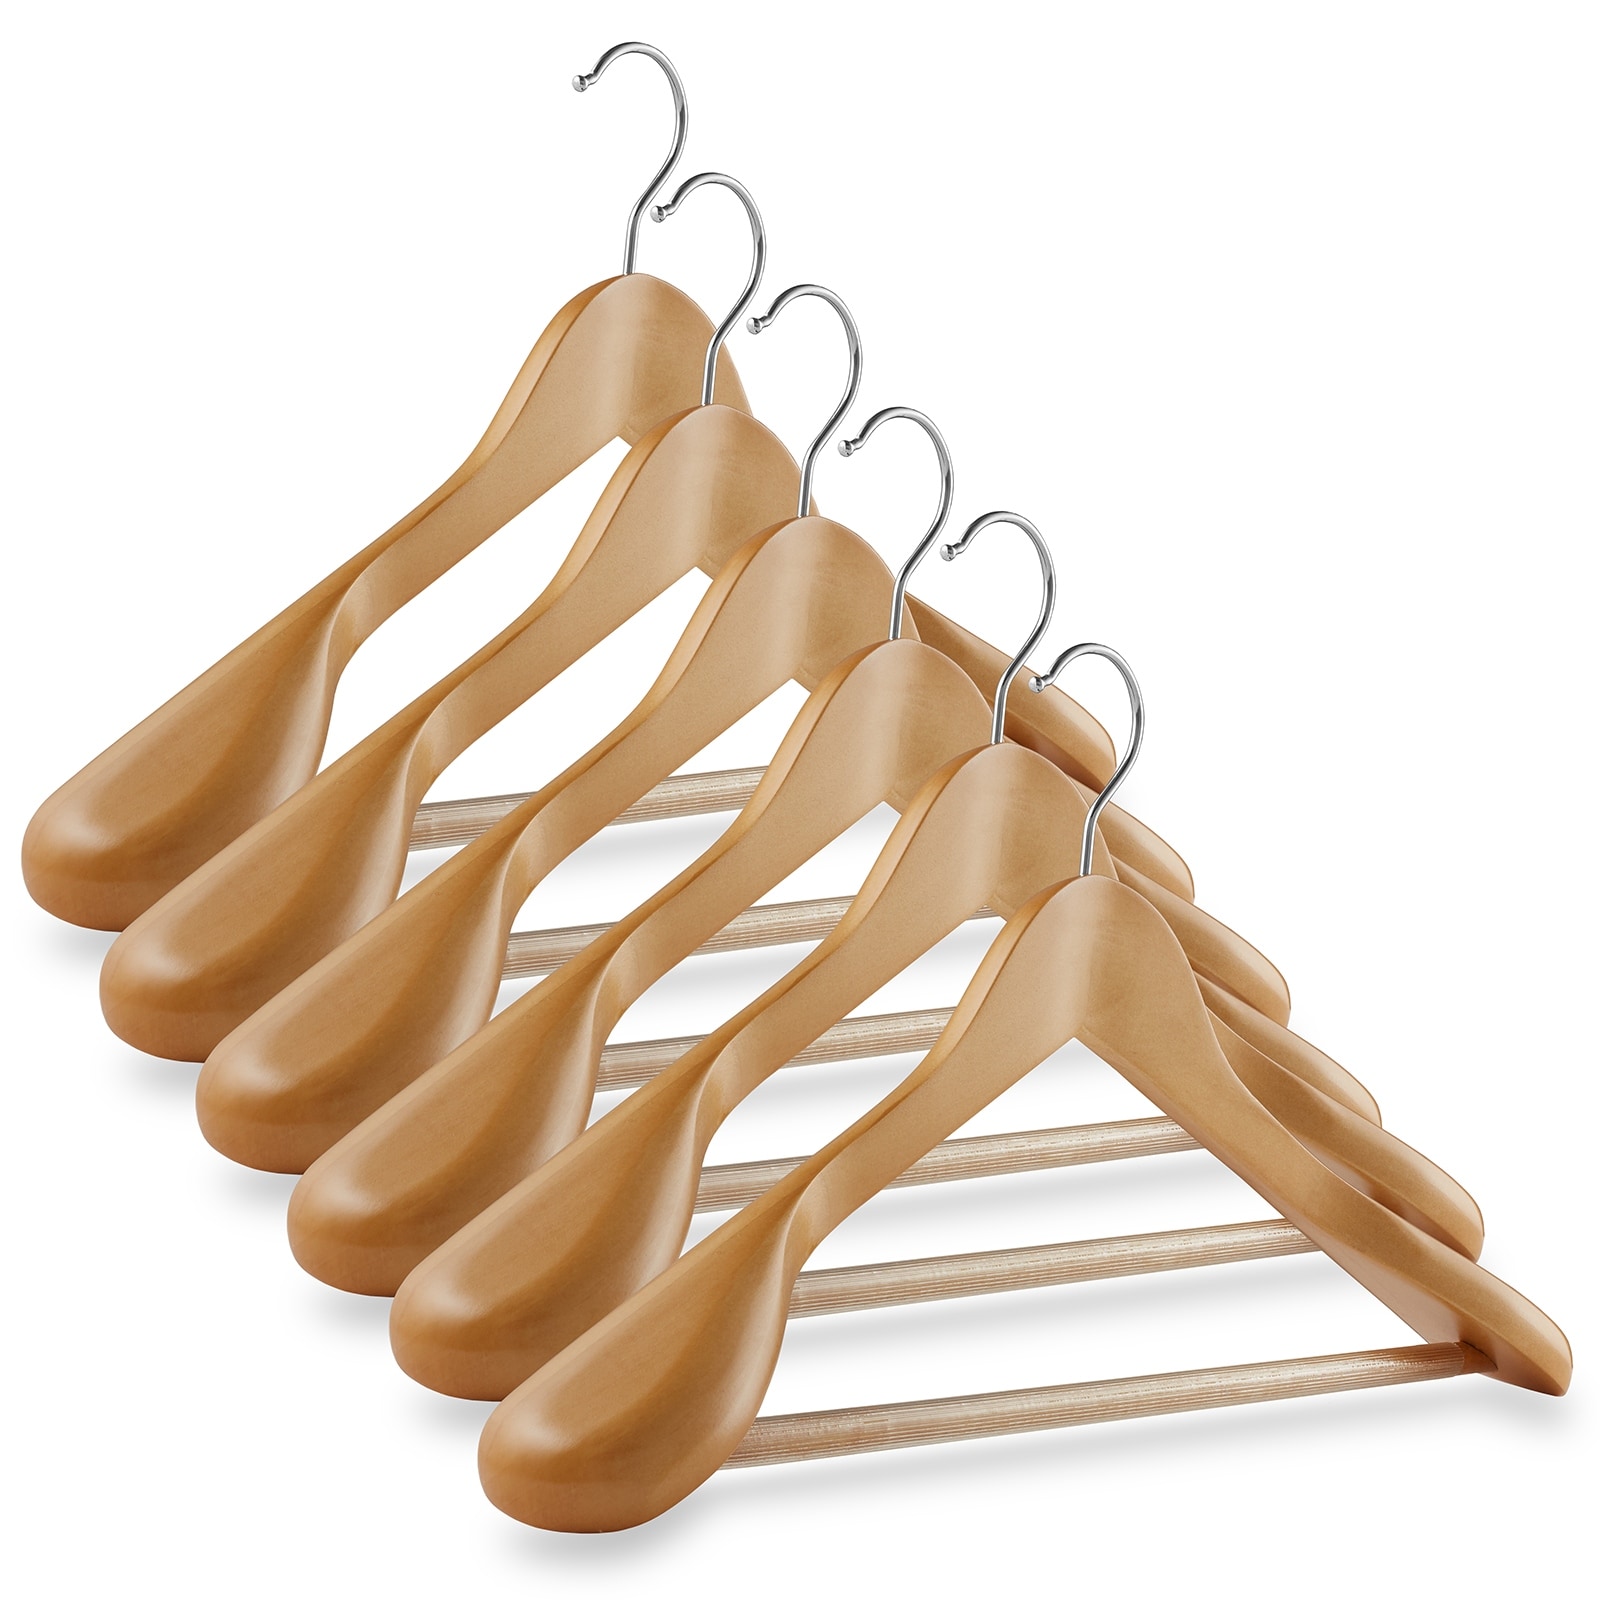 https://ak1.ostkcdn.com/images/products/is/images/direct/ca71bfb8f18419b42fb094174e3c46ba3f059584/6-Pack-Wide-Shoulder-Wooden-Suit-Hangers-by-Casafield.jpg